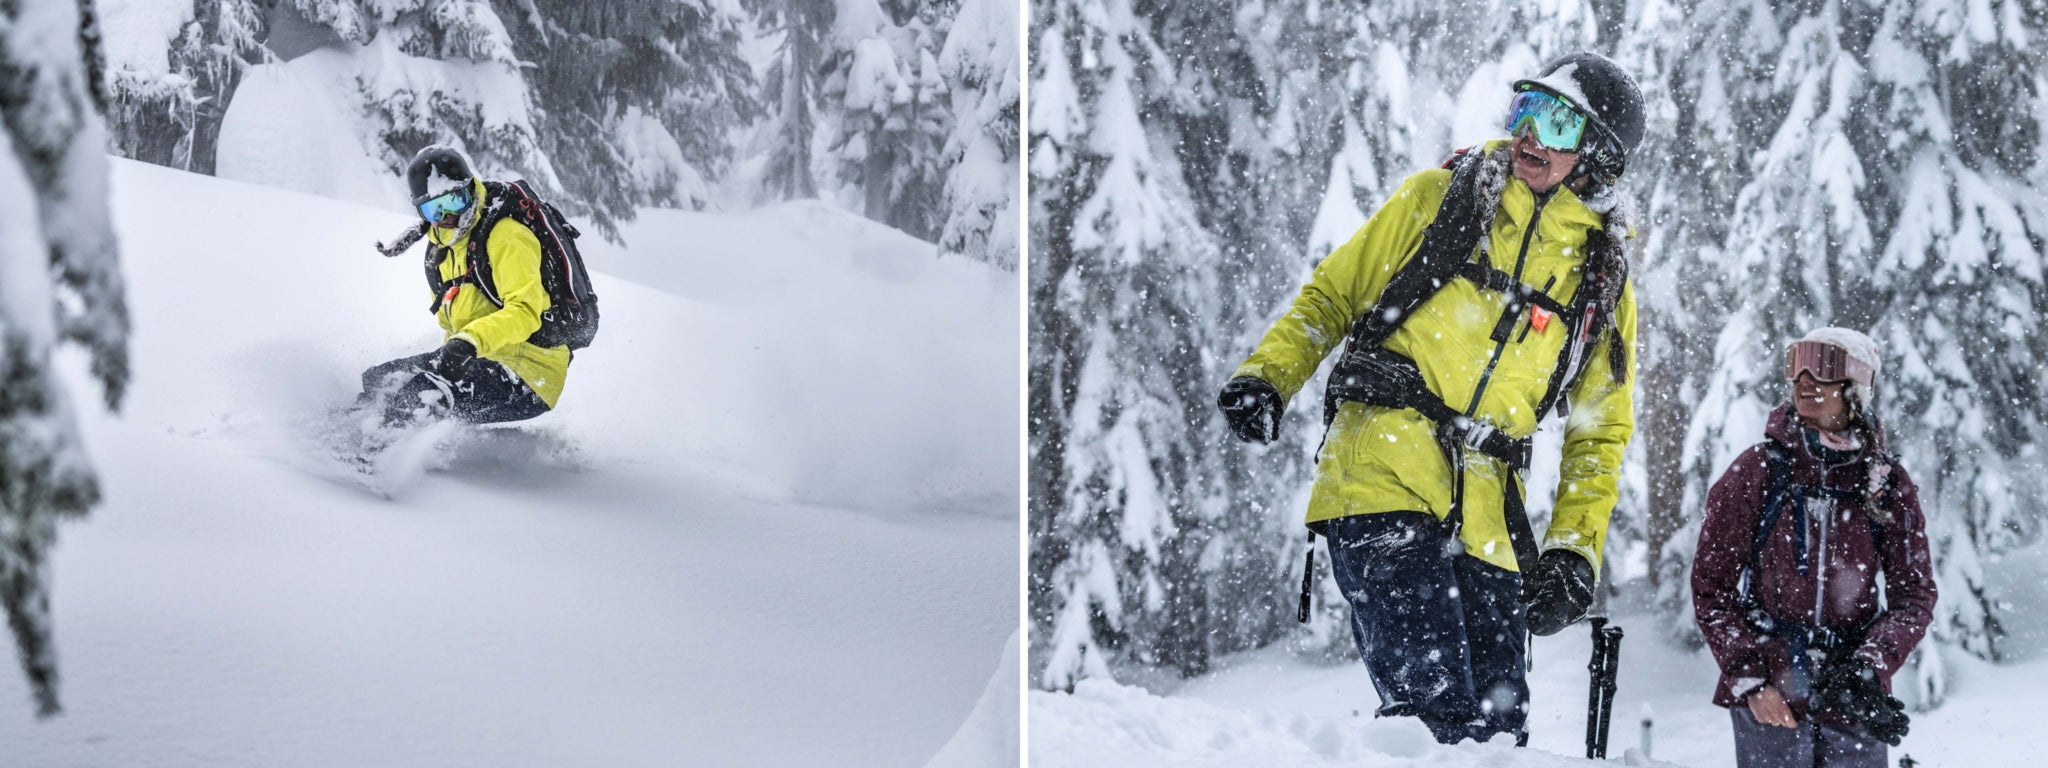 Left: Sandy enjoys deep powder on the shared territory of the Sḵwx̱wú7mesh and Líl̓wat peoples.  Right: Sandy shares a moment of stoke with Leah as they look back at their fresh tracks.